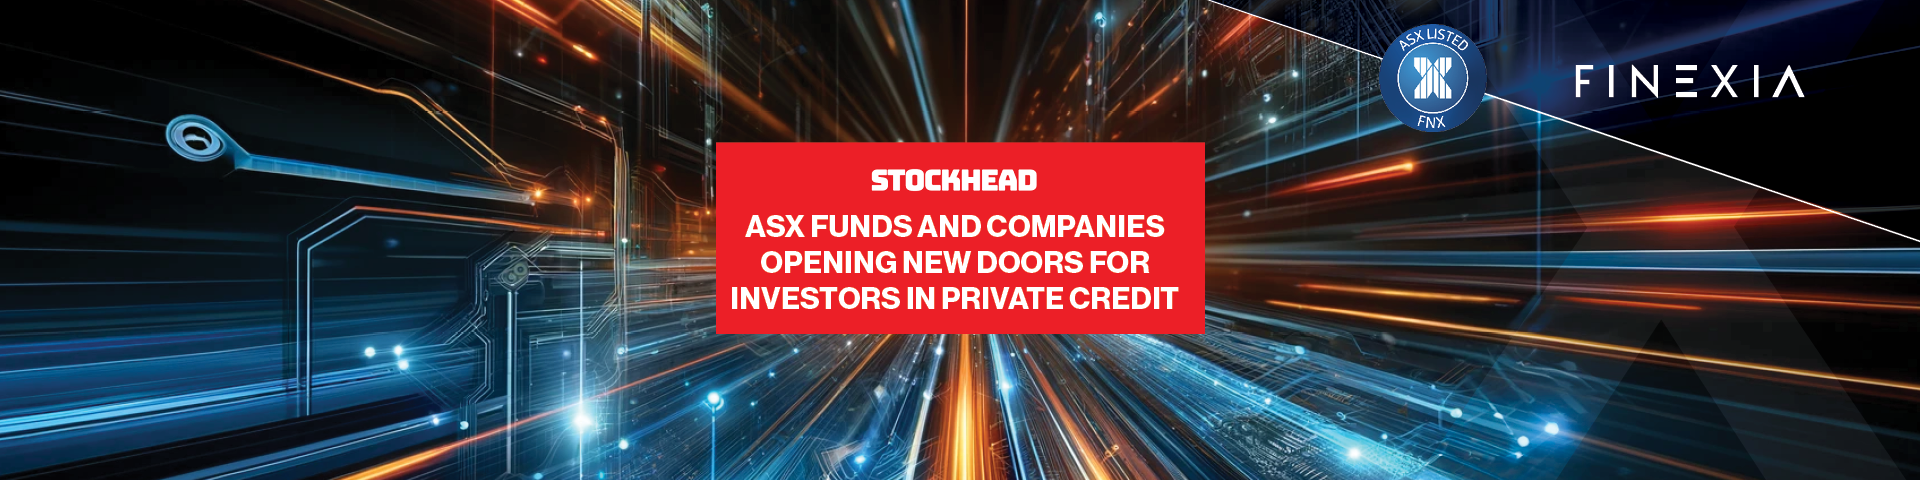 ASX funds and companies opening new doors for investors in private credit